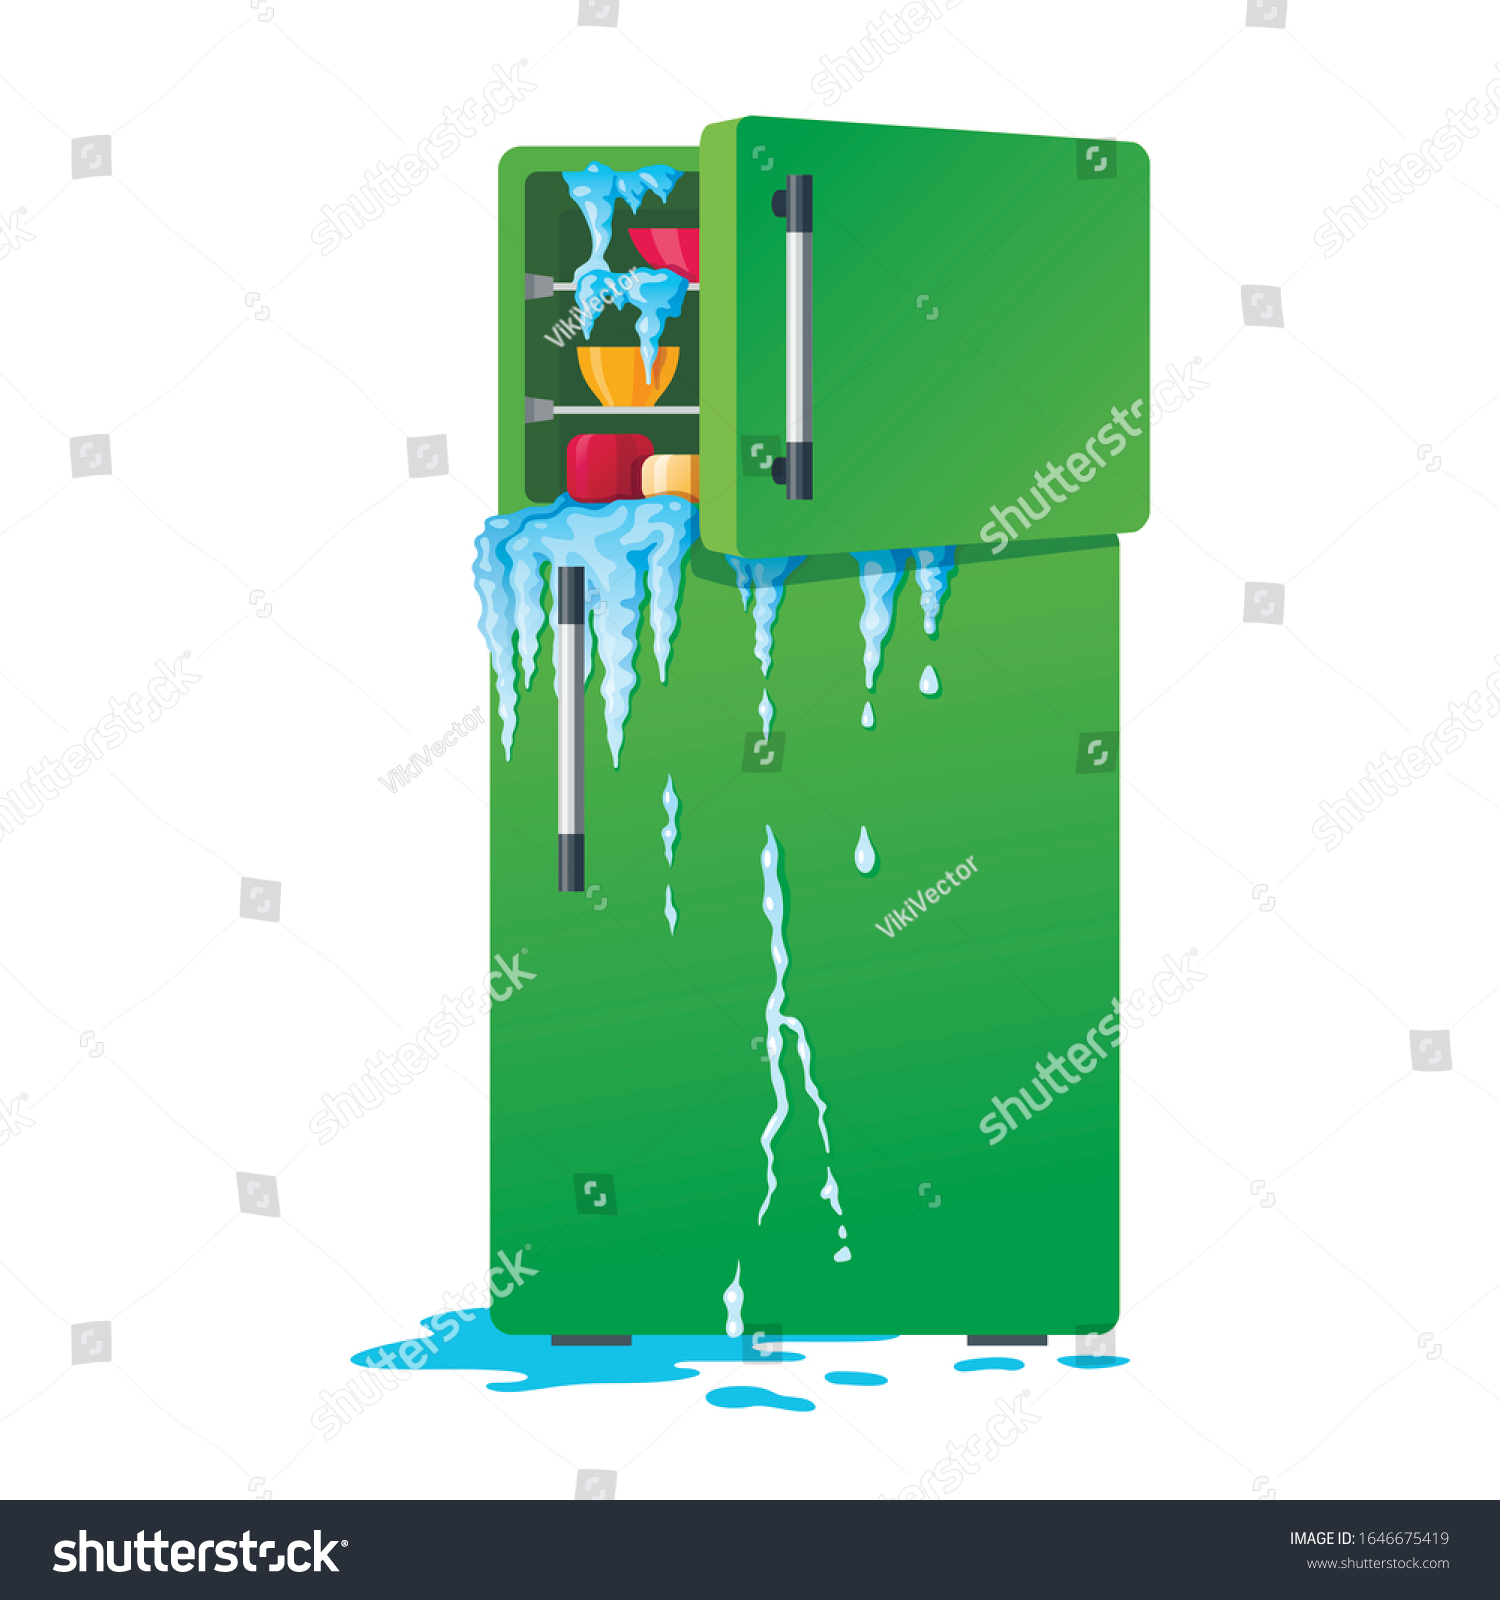 SVG of Broken refrigerator with opened freezer, melting ice and dripping water. Damaged fridge, old kitchen appliance with leakage or crash of defrosting system, Flat cartoon colorful vector illustration. svg